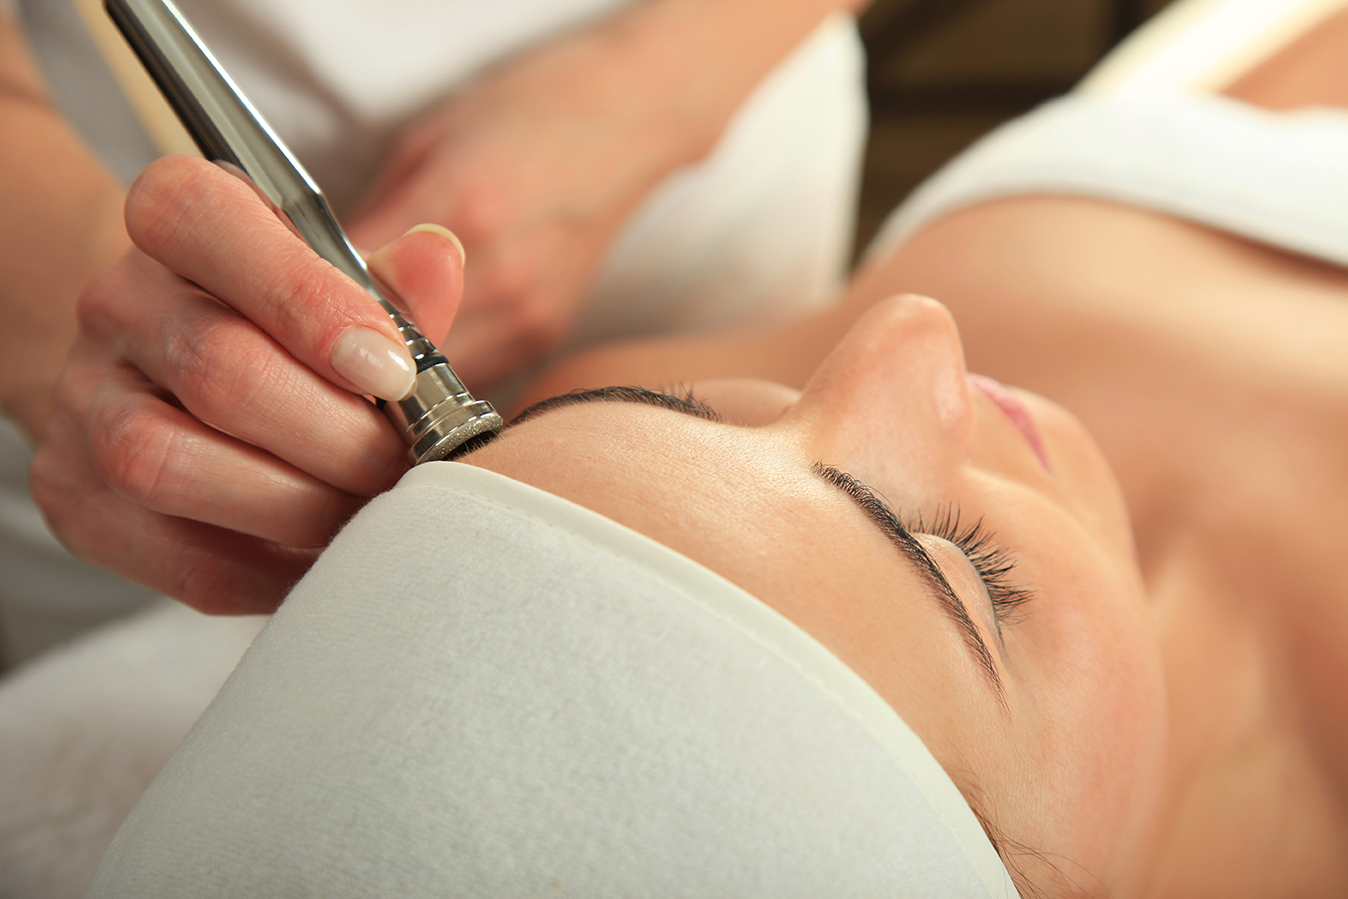 Microdermabrasion at Azura Skin Care Center in Cary, NC